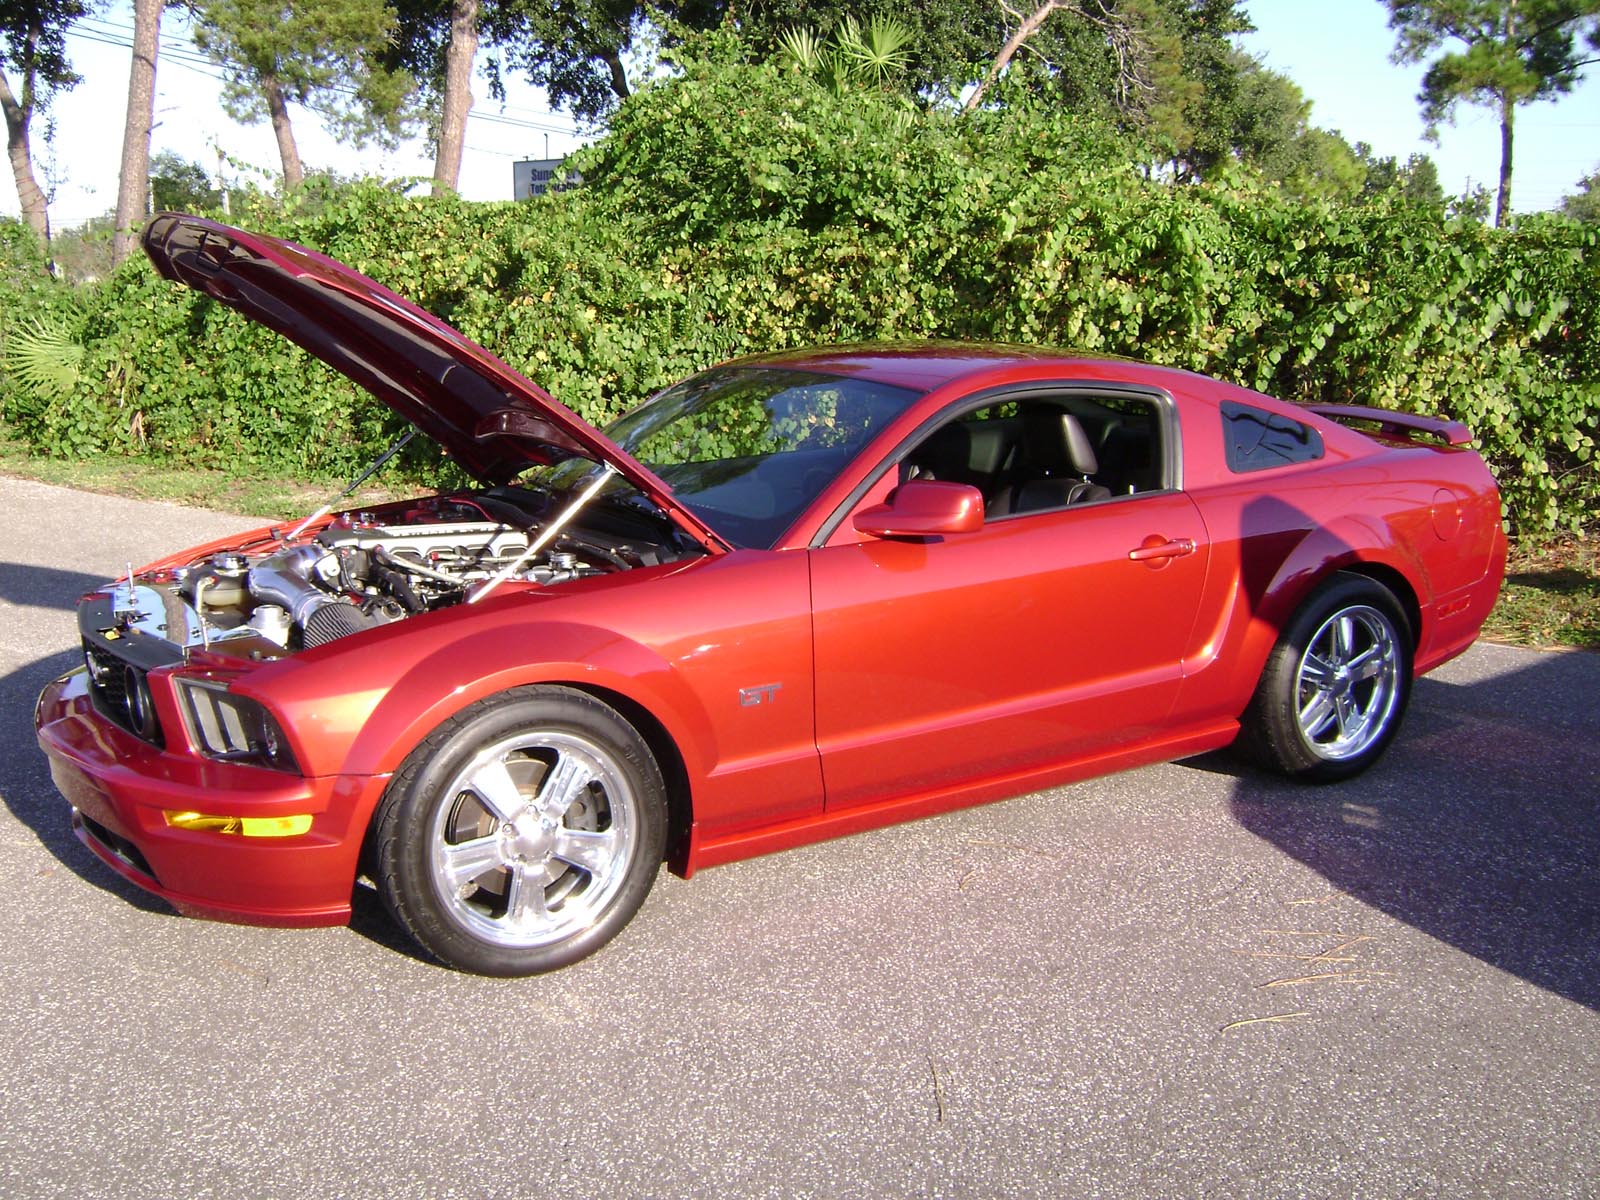 2005 Ford mustang gt quarter mile #4